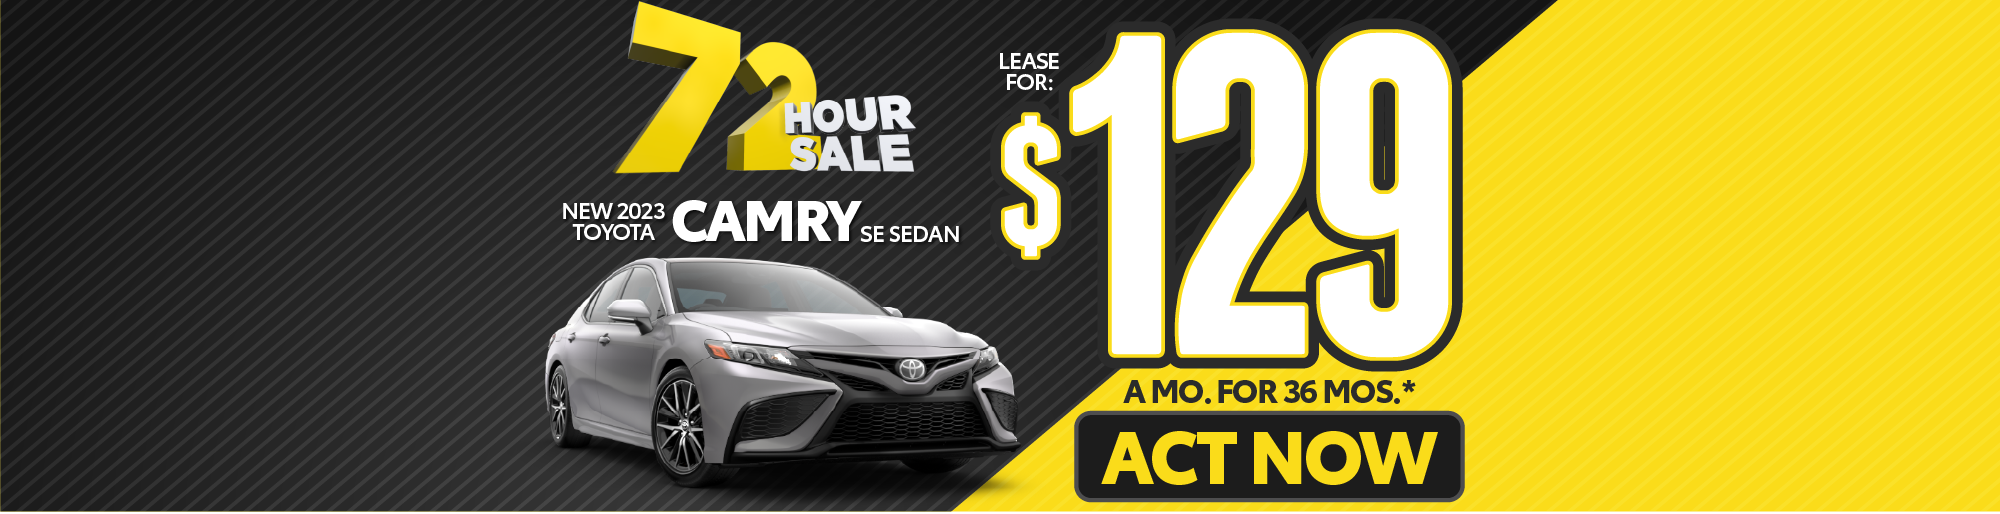 New 2023 Toyota Camry SE Sedan Lease for only $129/mo.* ACT NOW